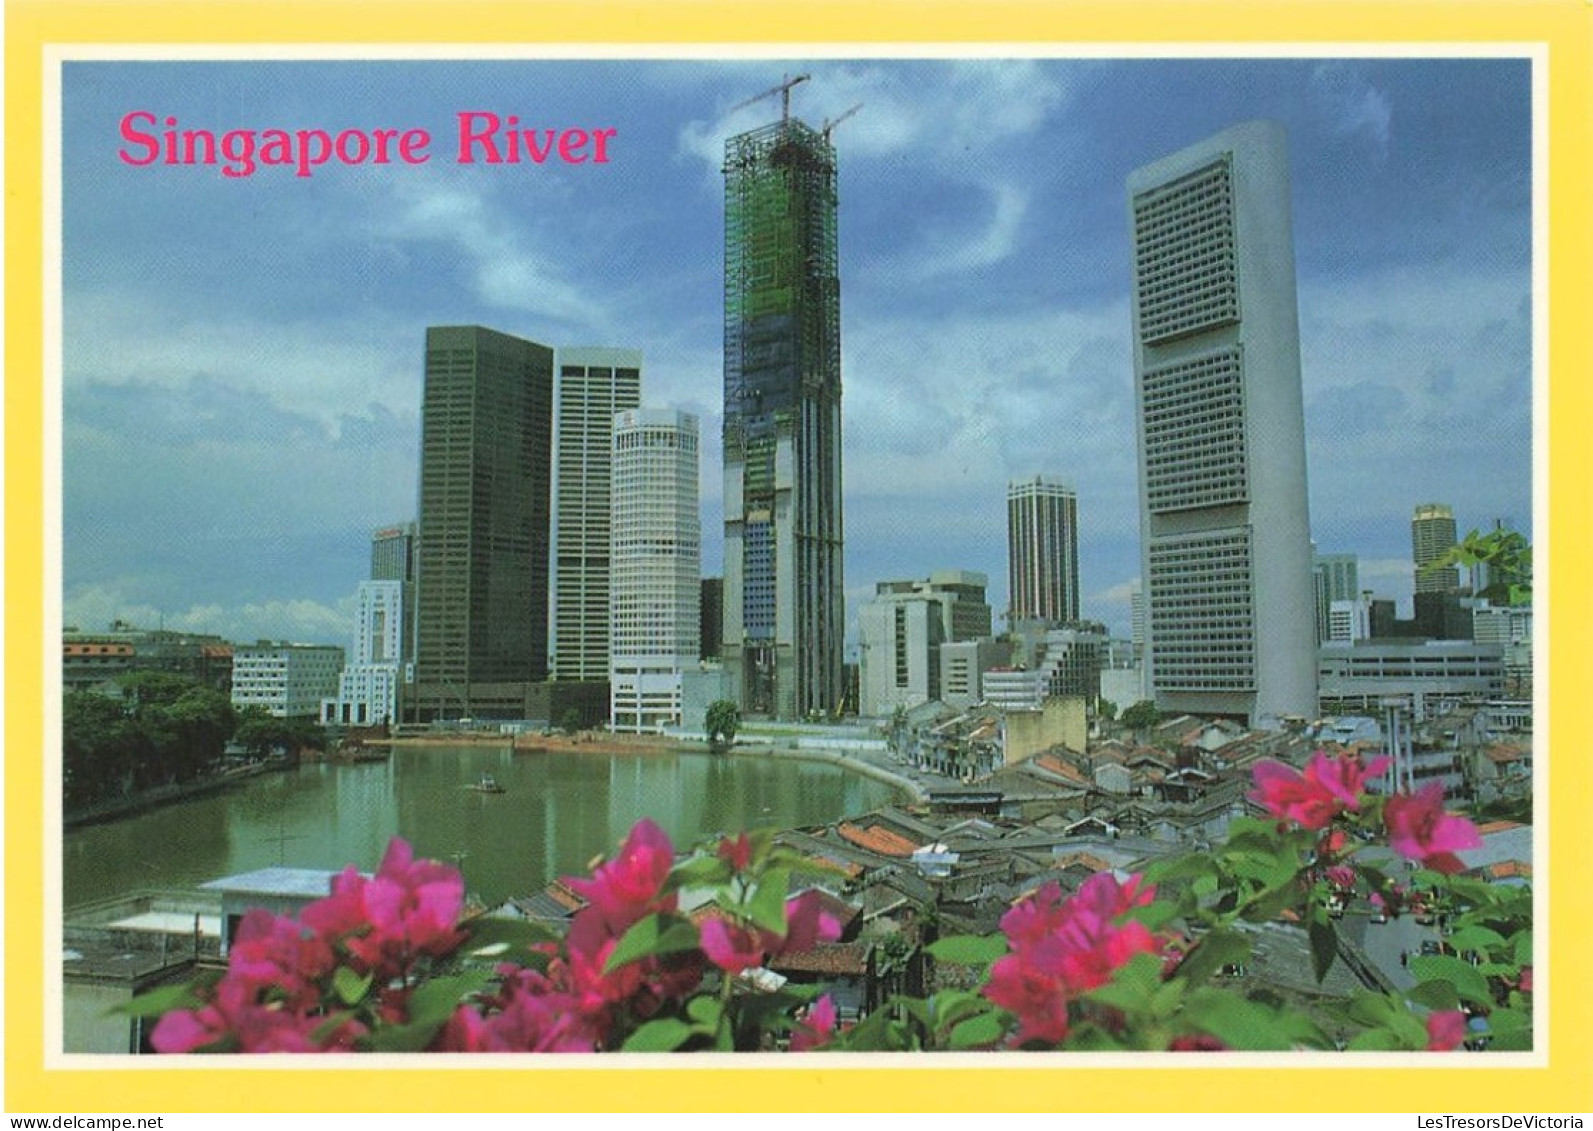 SINGAPOUR - Picturesque View Of Towering Skyscrapers And Old Buildings Alongside The Singapore River - Carte Postale - Singapur